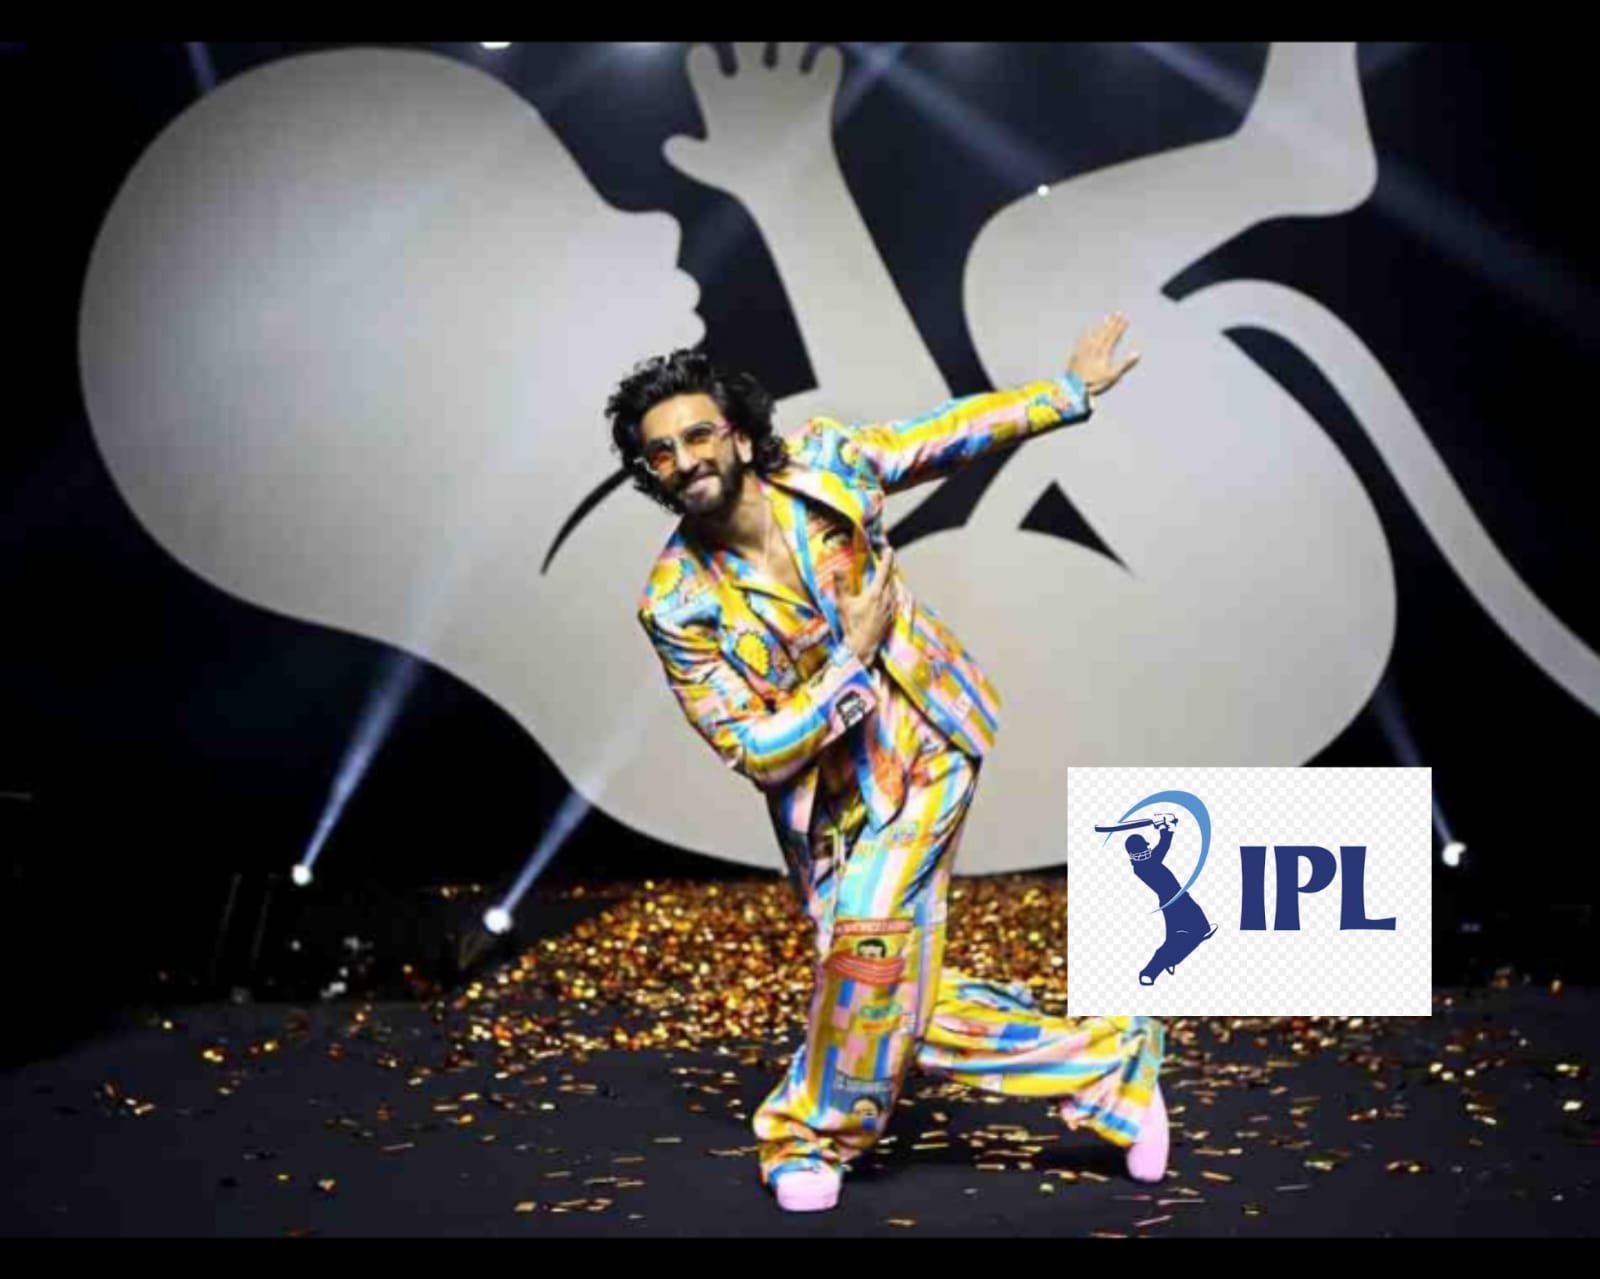 IPL 2022 Closing Ceremony: Film 83 Star Ranveer Singh, AR Rahman to perform in the closing ceremony of IPL, BCCI to invite all former captains of Indian Cricket team